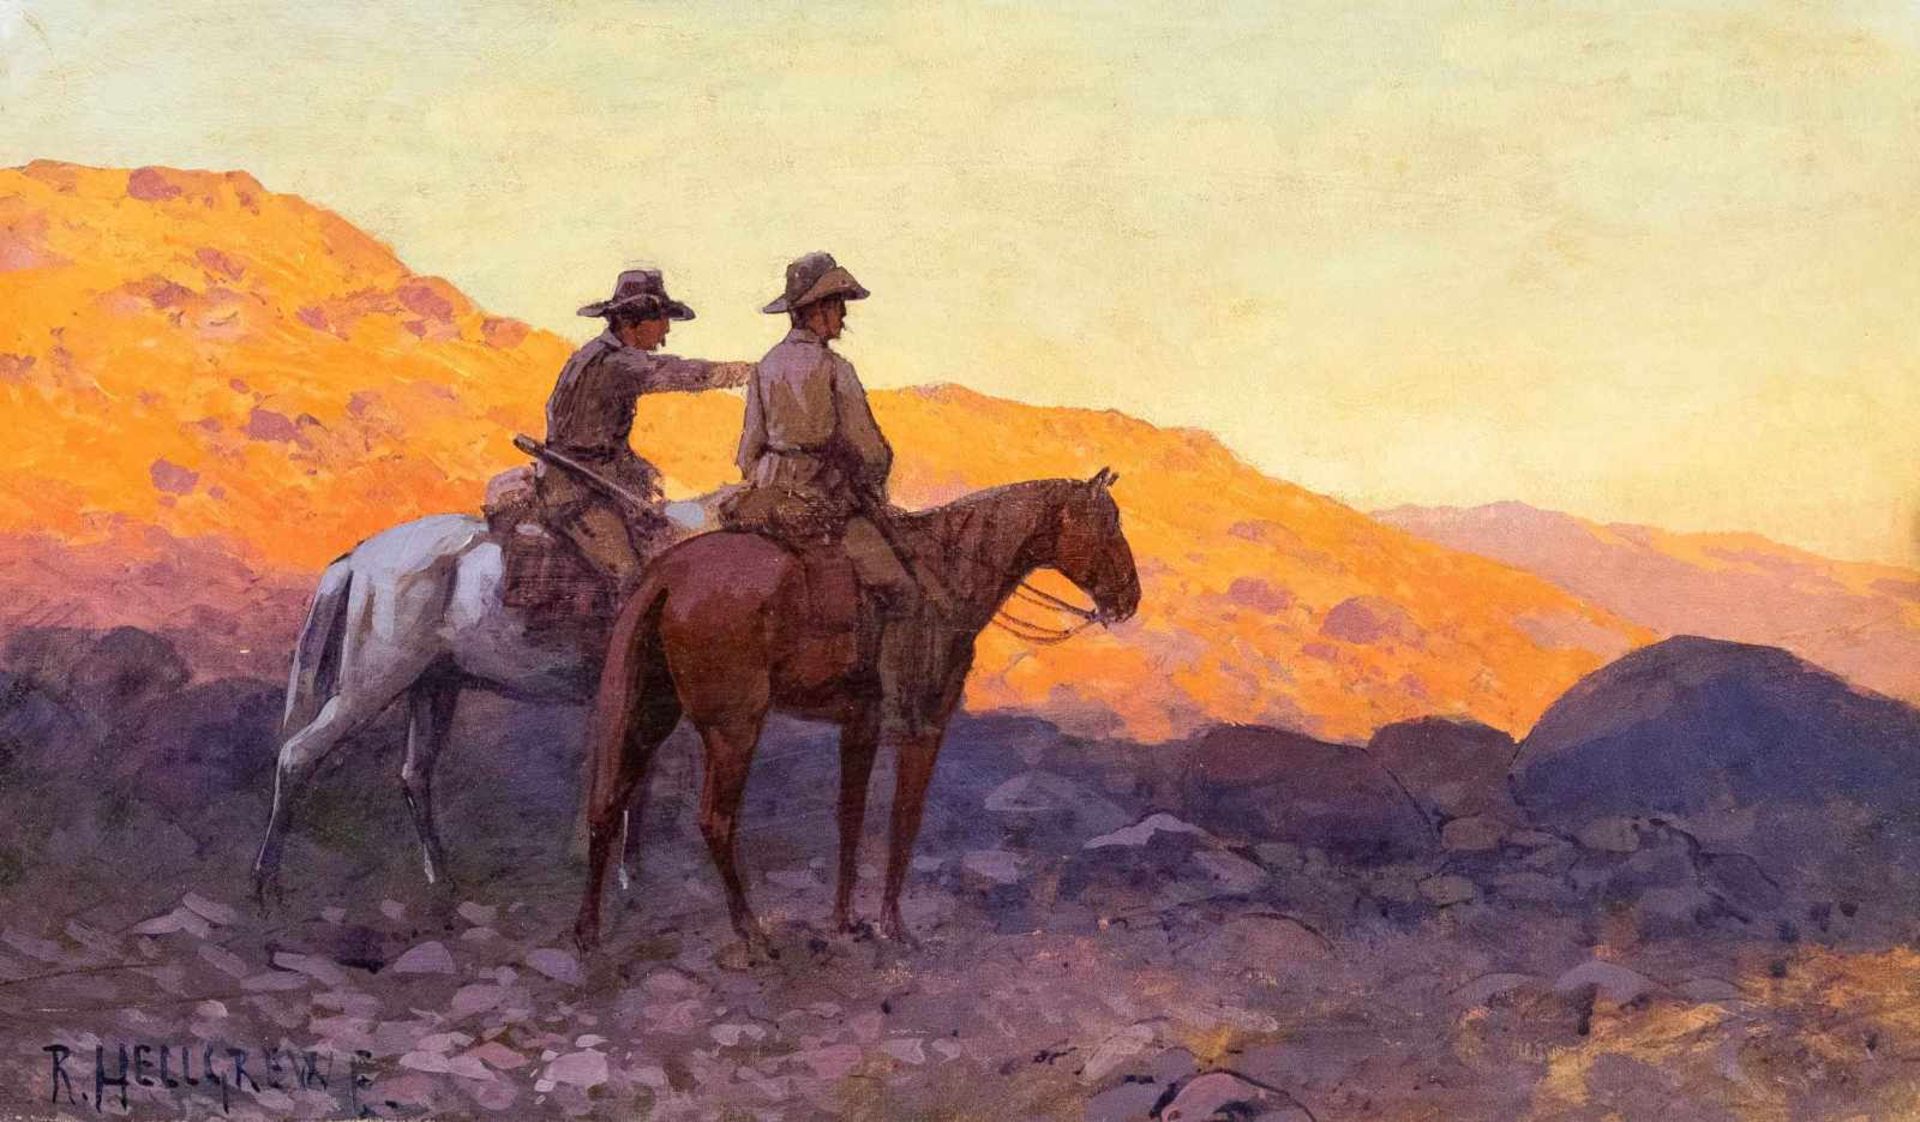 Rudolf Hellgrewe (1860-1935), Berlin landscape and colonial painter. Two cavalry scouts in